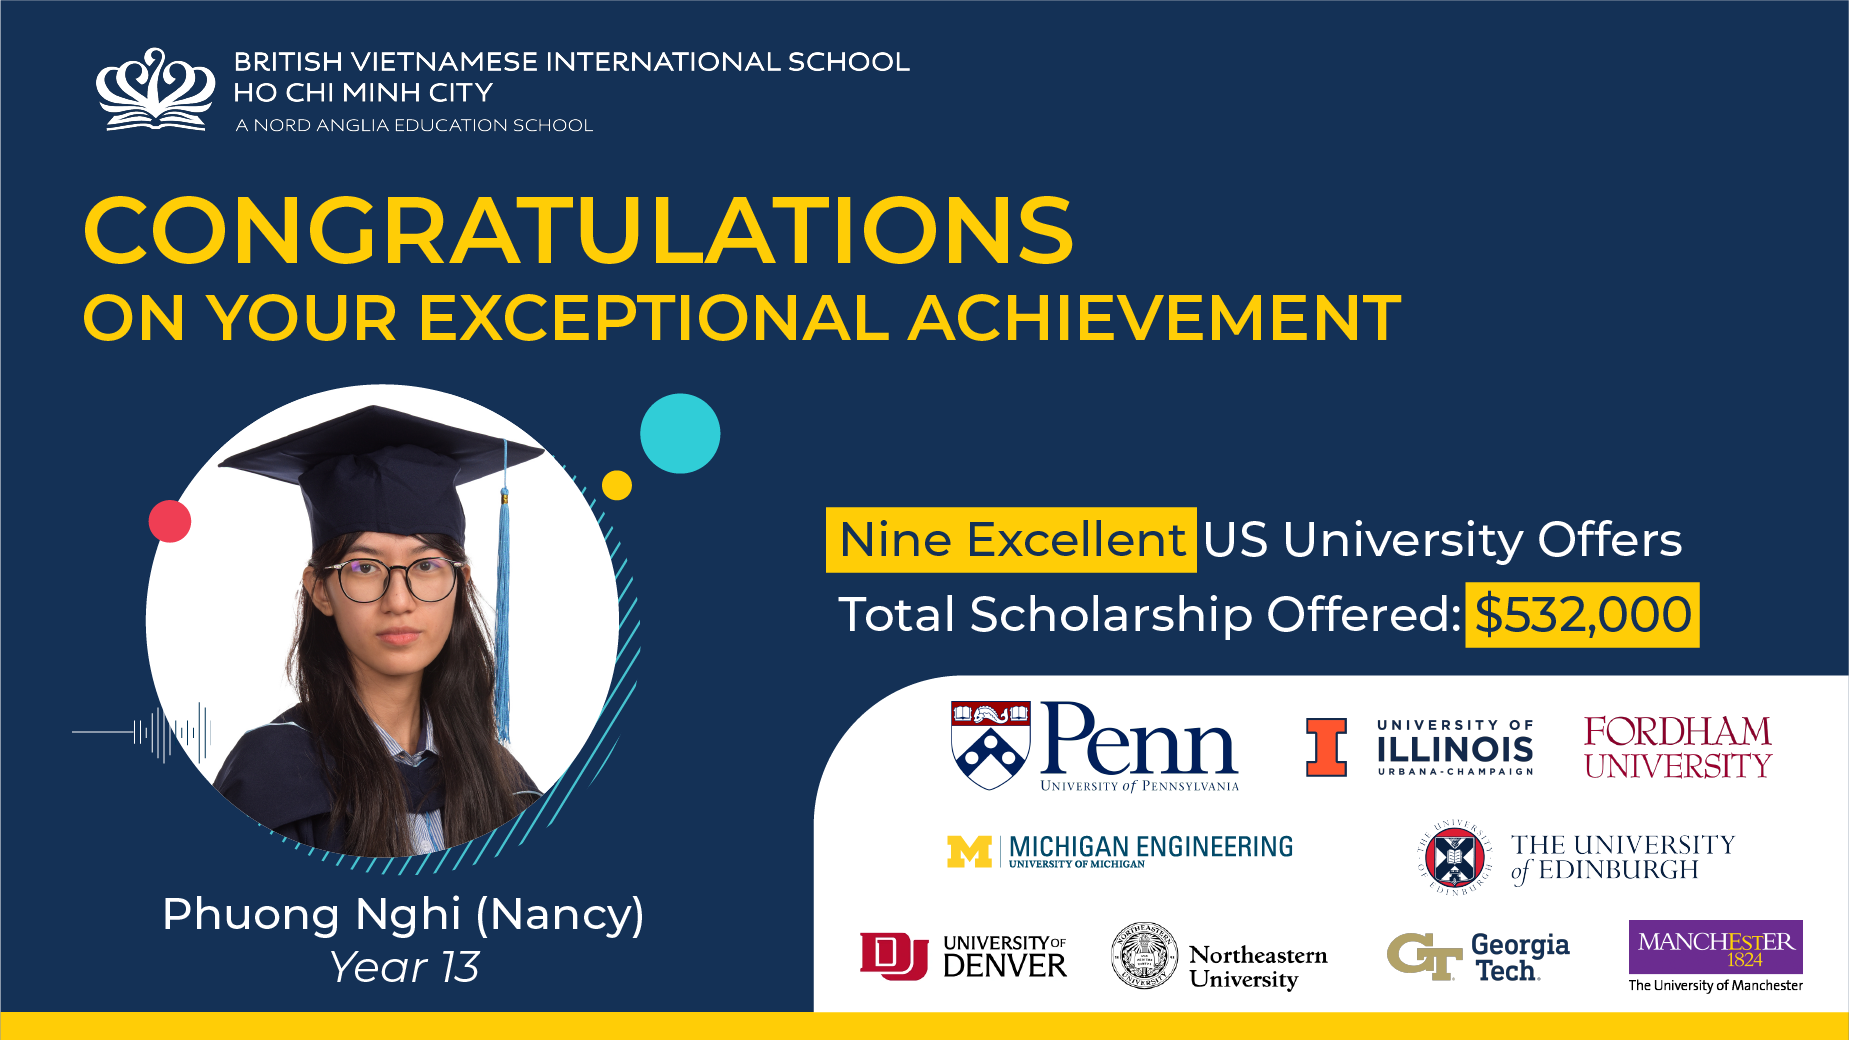 Phuong Nghi Nancy, a Year 13 student, has been excellently admitted to 9 US universities with a total scholarship of up to 13.5 billion VND-Phuong Nghi Nancy Year 13 excellently admitted 9 US universities scholarship 13 5 billion VND-Nancy Uni Offers Banner